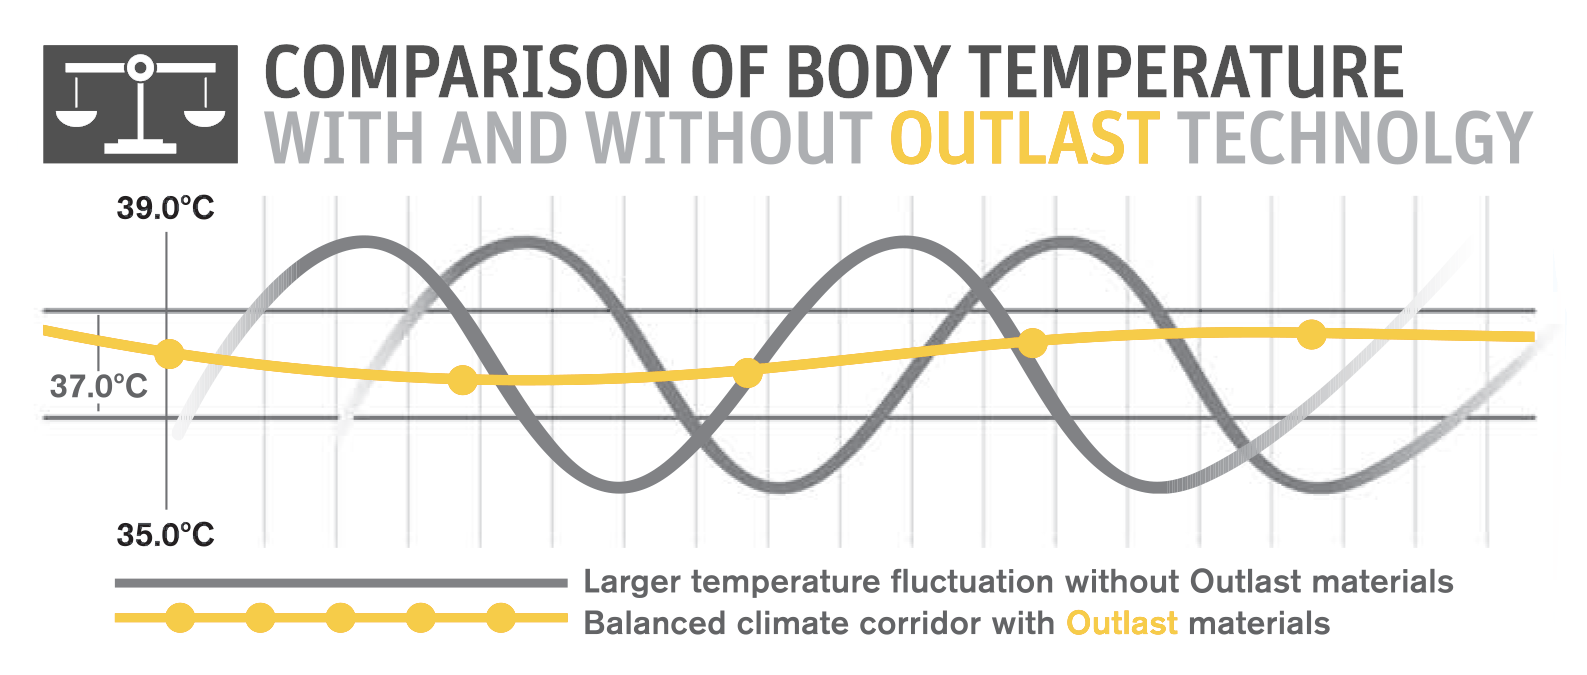 Comparison of body temperature with and without outlast